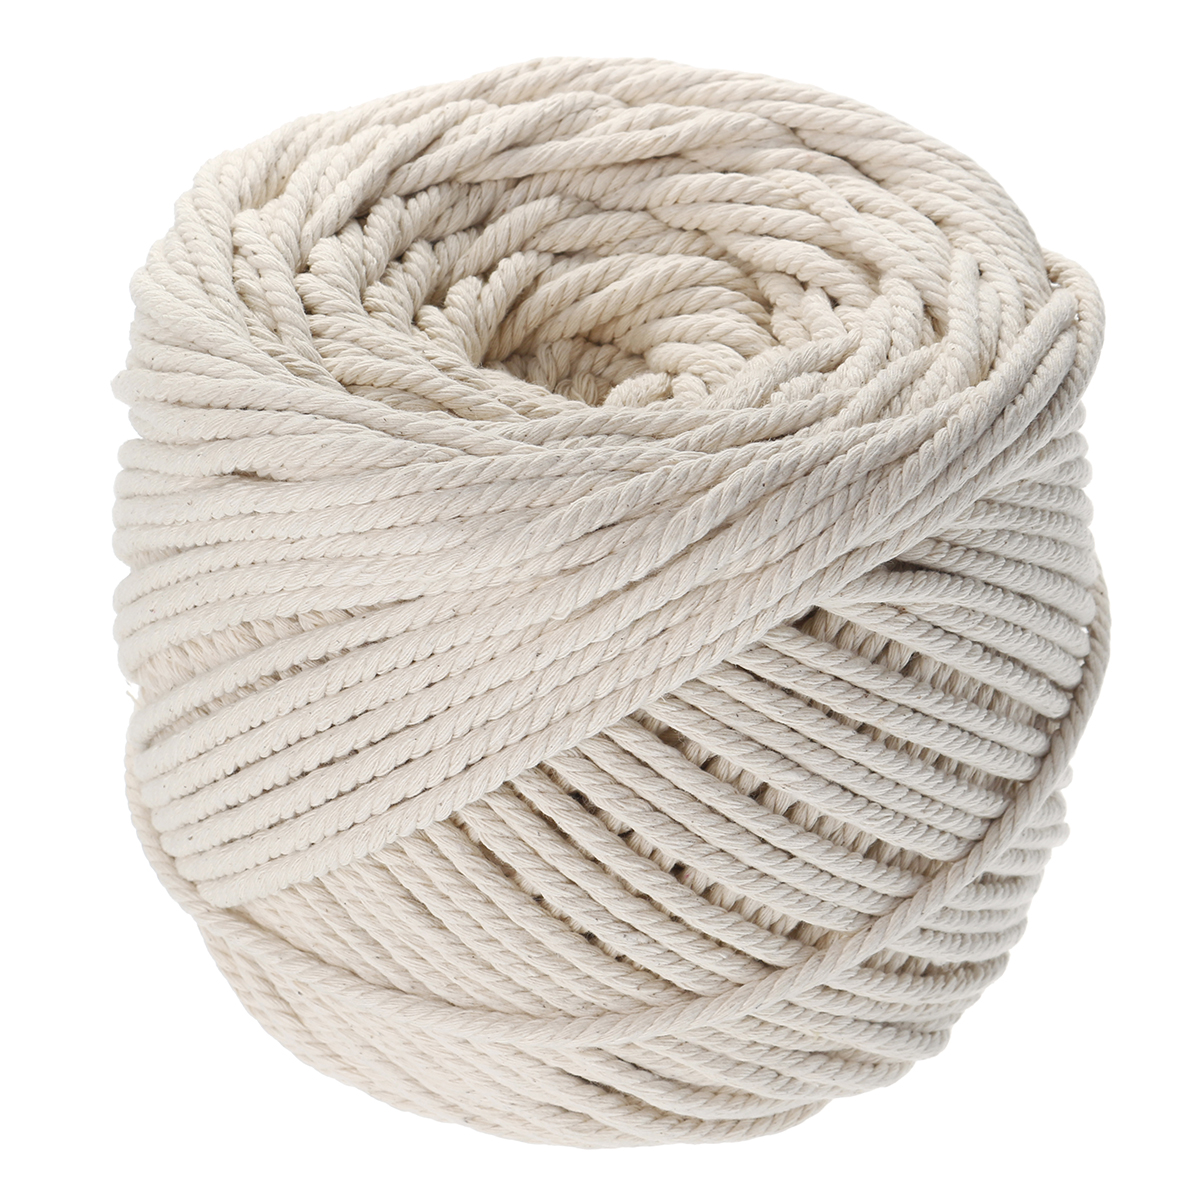 300M-4-Strands-Braided-Cotton-Rope-5mm-Twisted-Cord-Craft-Rope-Multifunctional-Tools-1311572-3